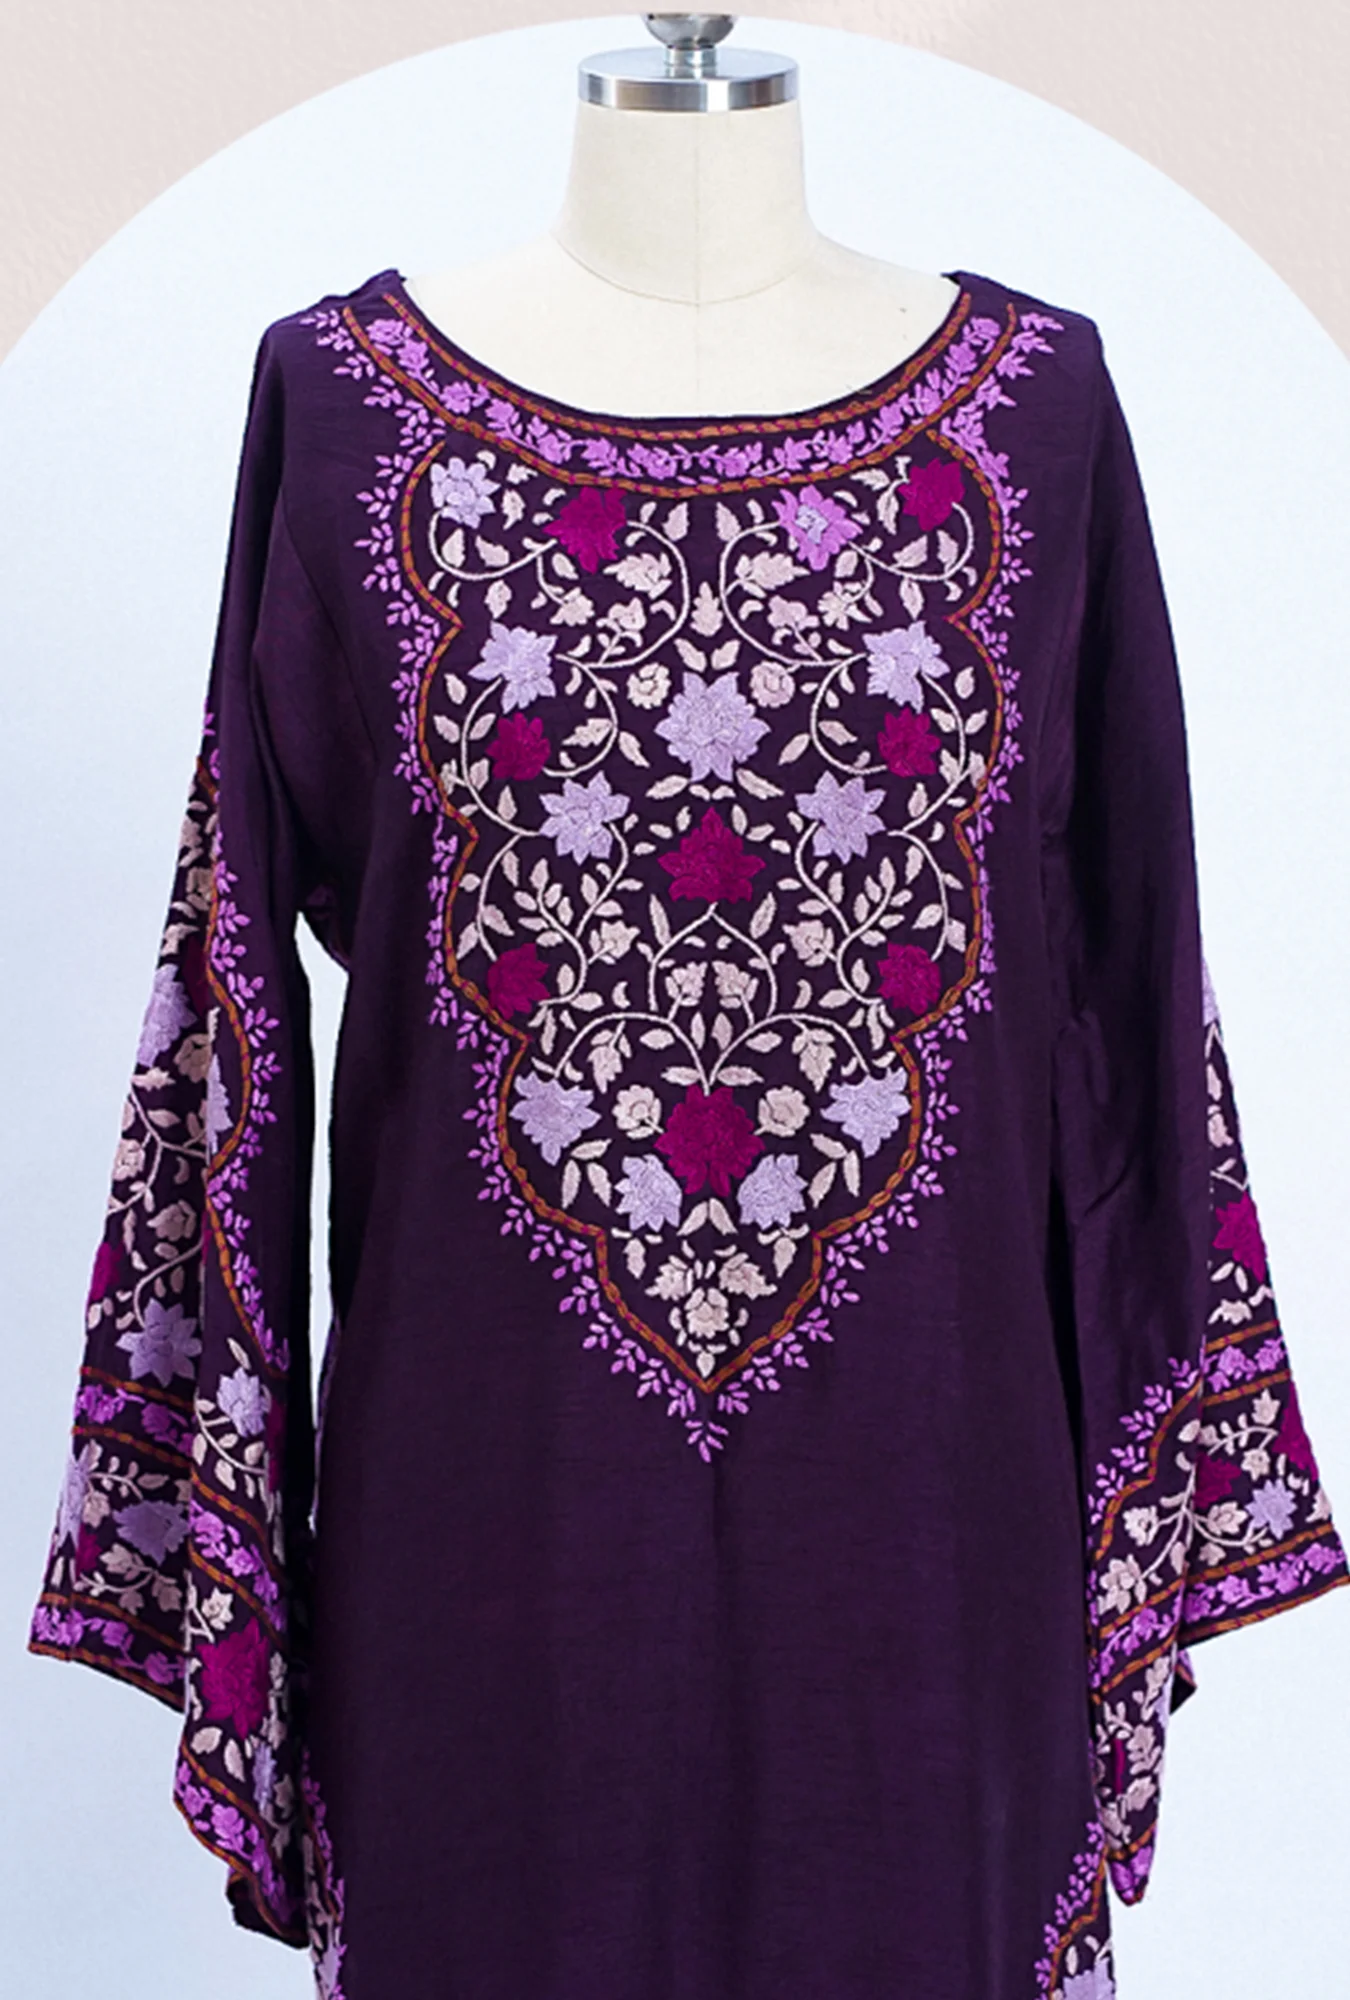 Women's short shirt with embroidery at front and sleeve